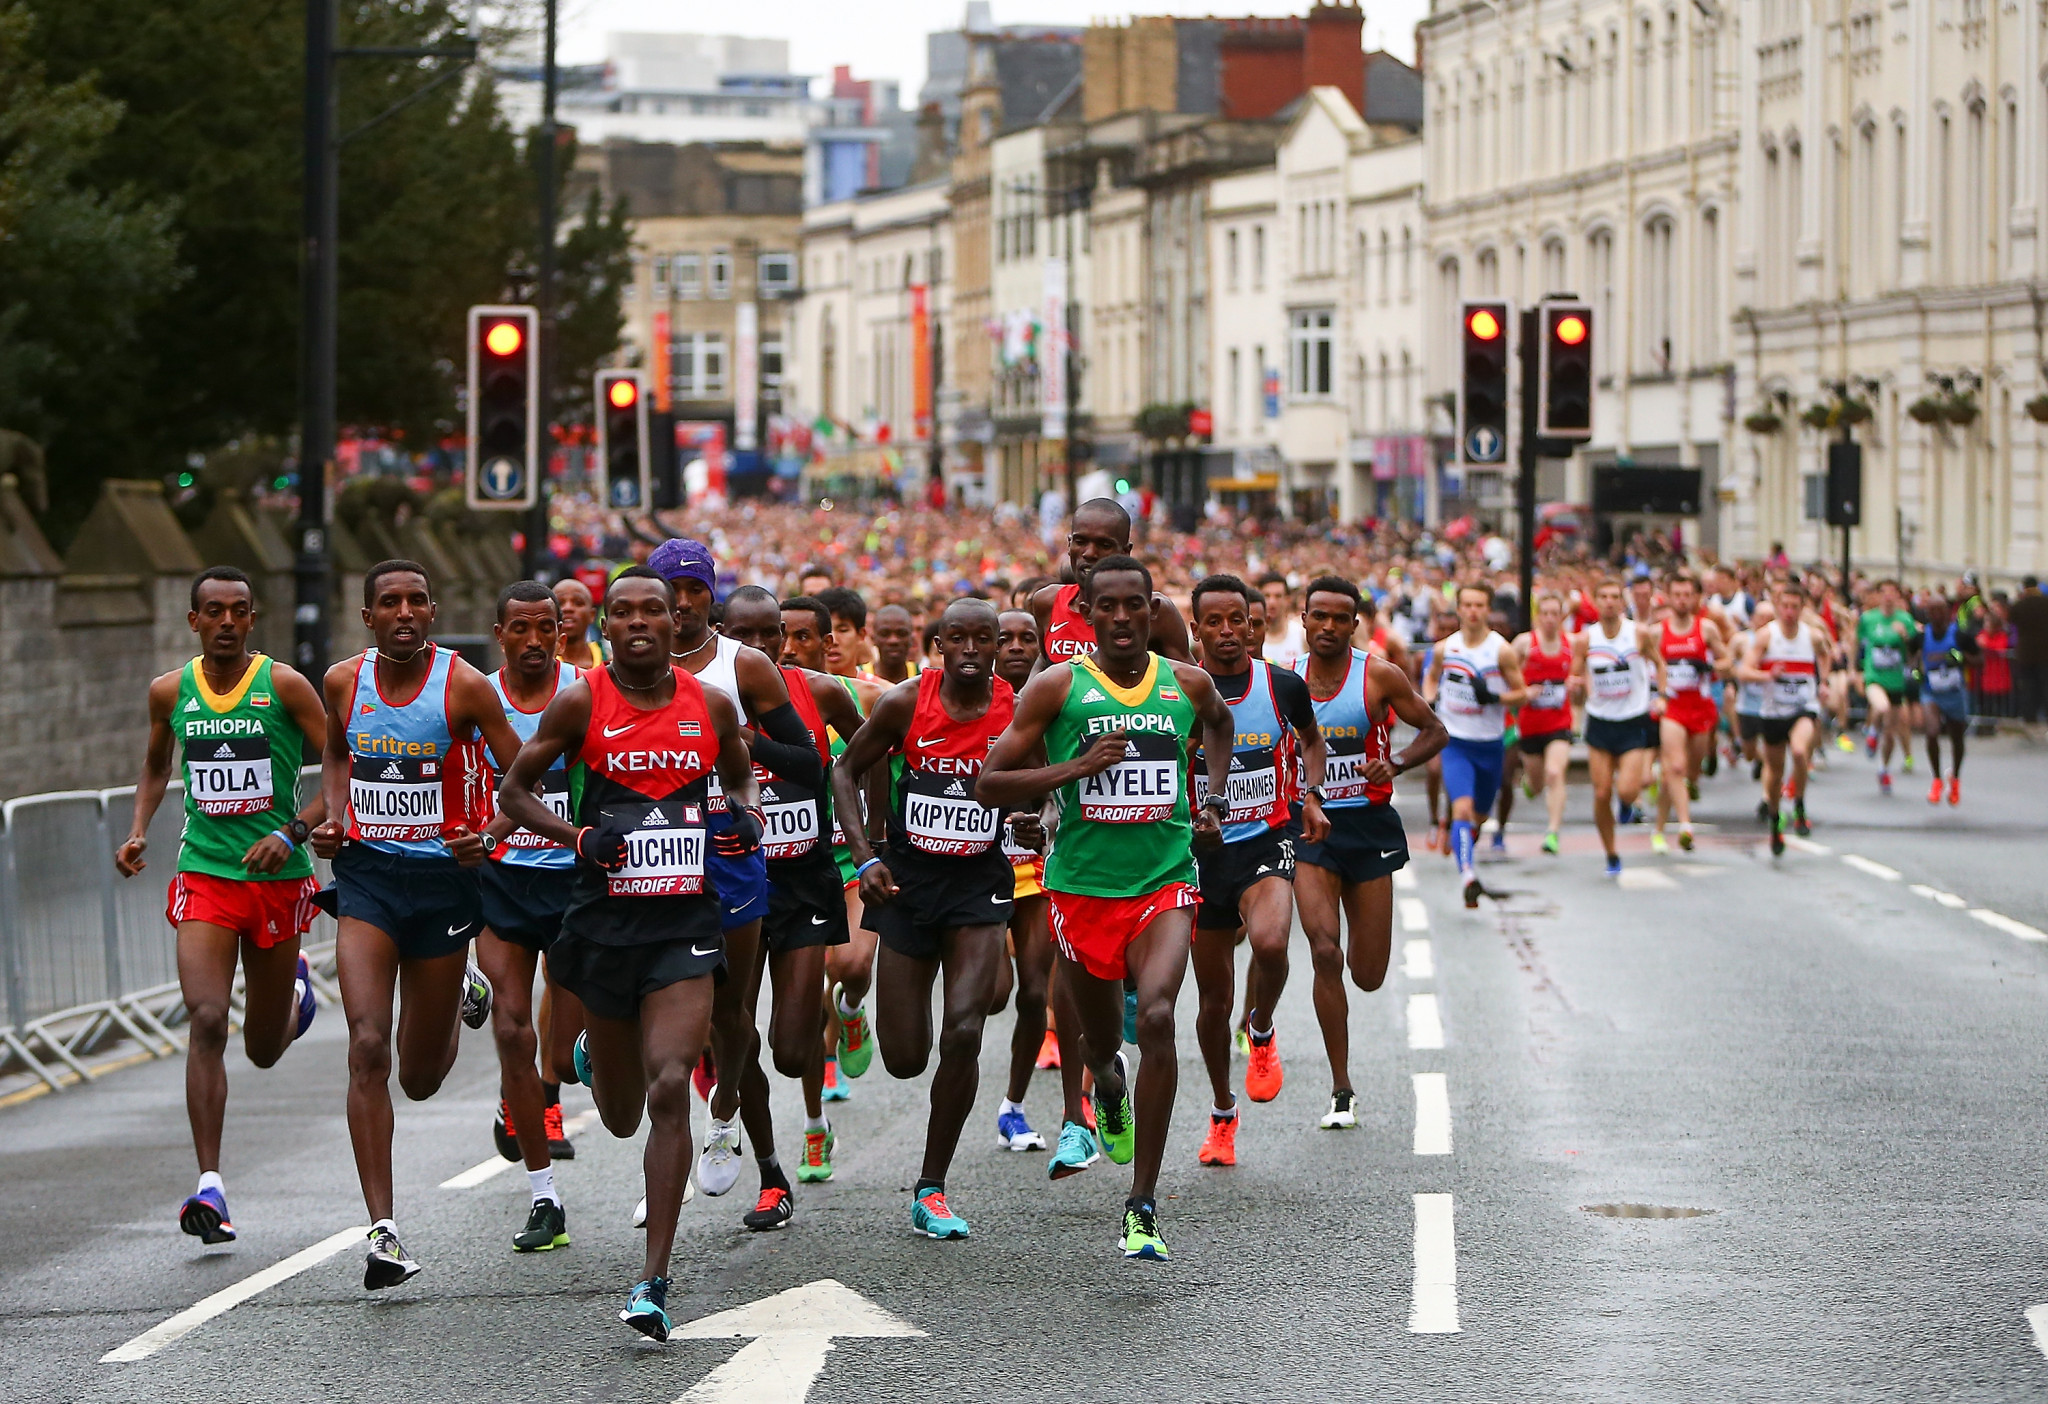 Runners pound the streets of Cardiff during the 2016 World Half Marathon Championships ©Getty Images